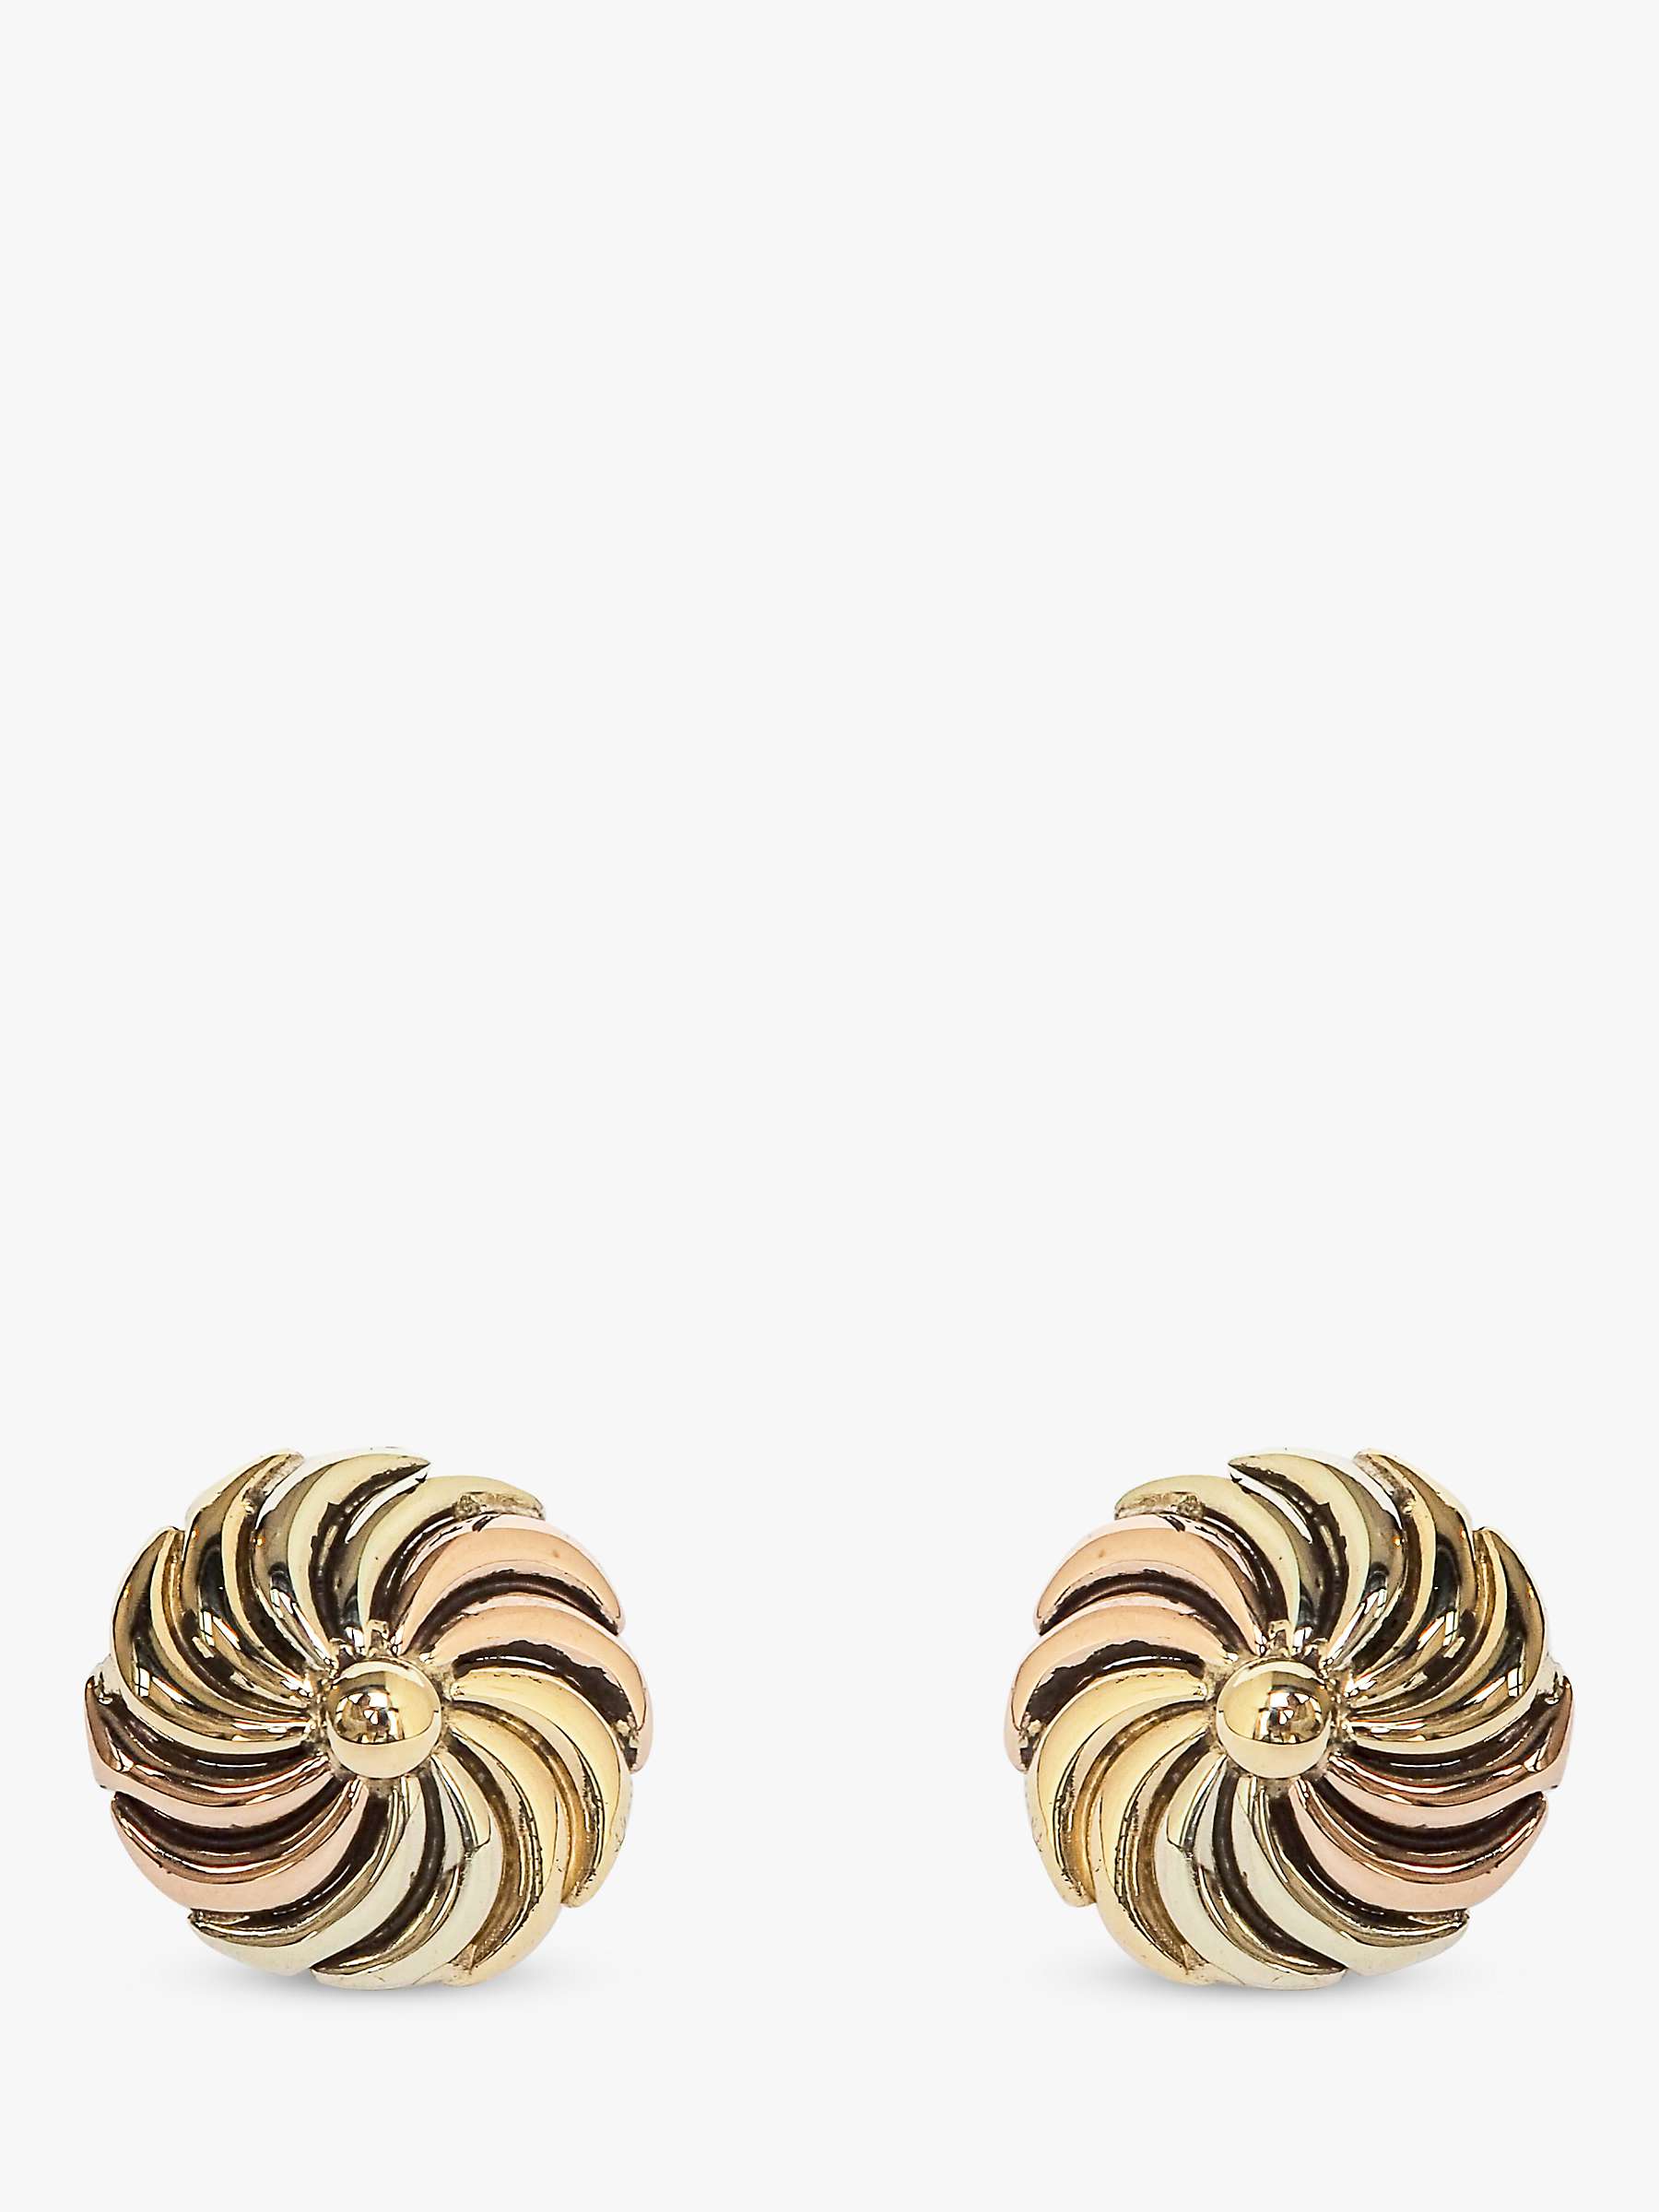 Buy L & T Heirlooms Second Hand 9ct Tri-Colour Gold Swirl Stud Earrings Online at johnlewis.com